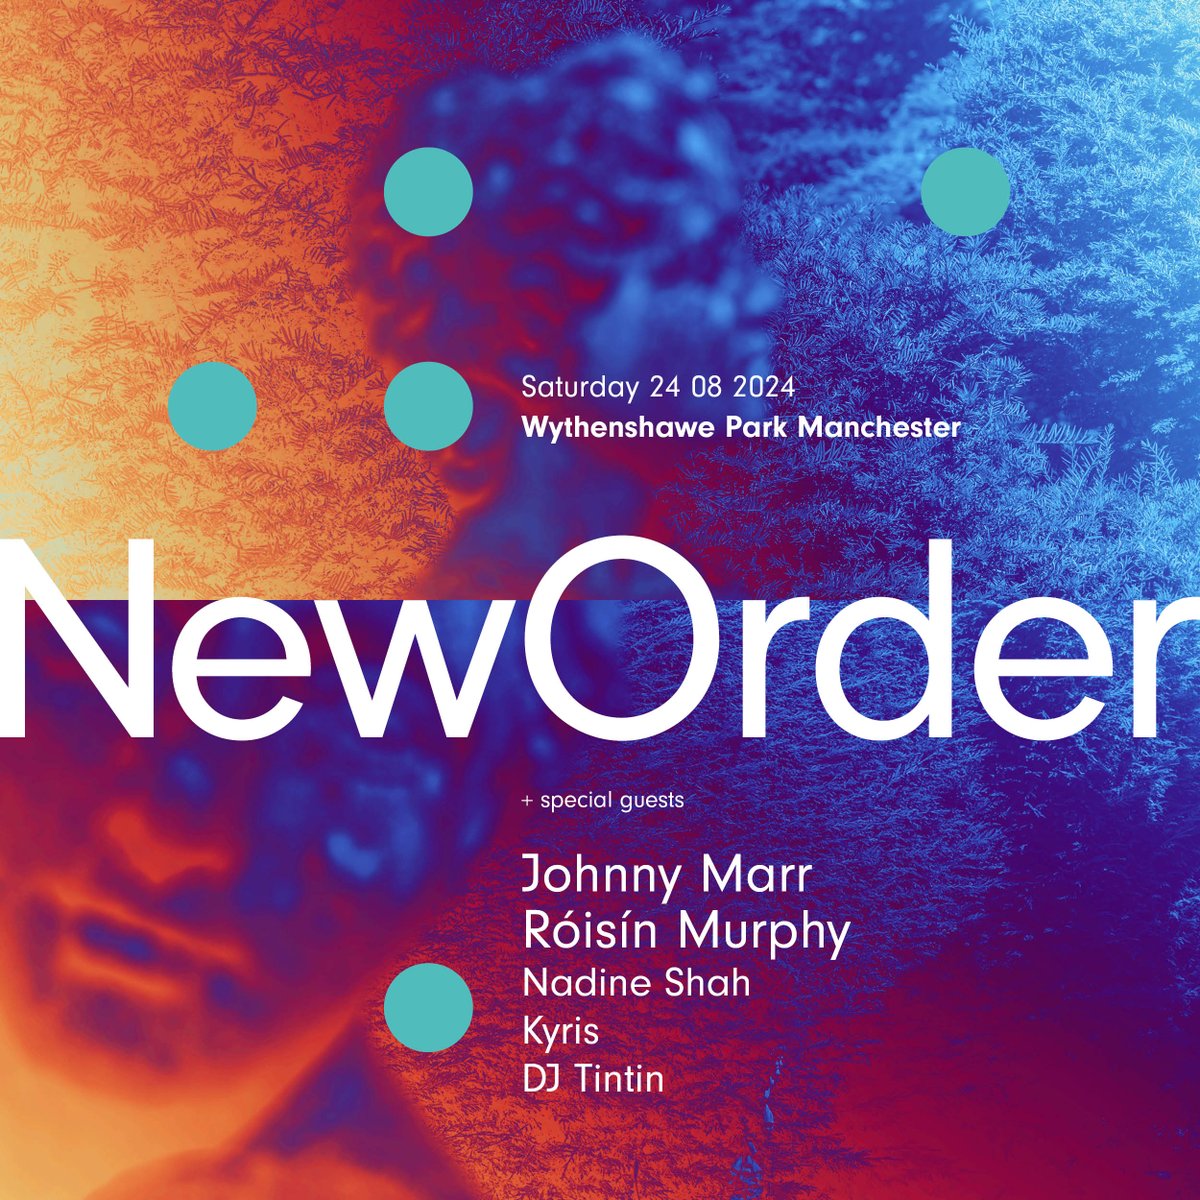 August bank hol weekend plans sorted with @neworder, @Johnny_Marr, @roisinmurphy, @nadineshah + more at Wythenshawe Park 🤝 What an incredible lineup! Don't miss out 🔗 gigst.rs/neworder